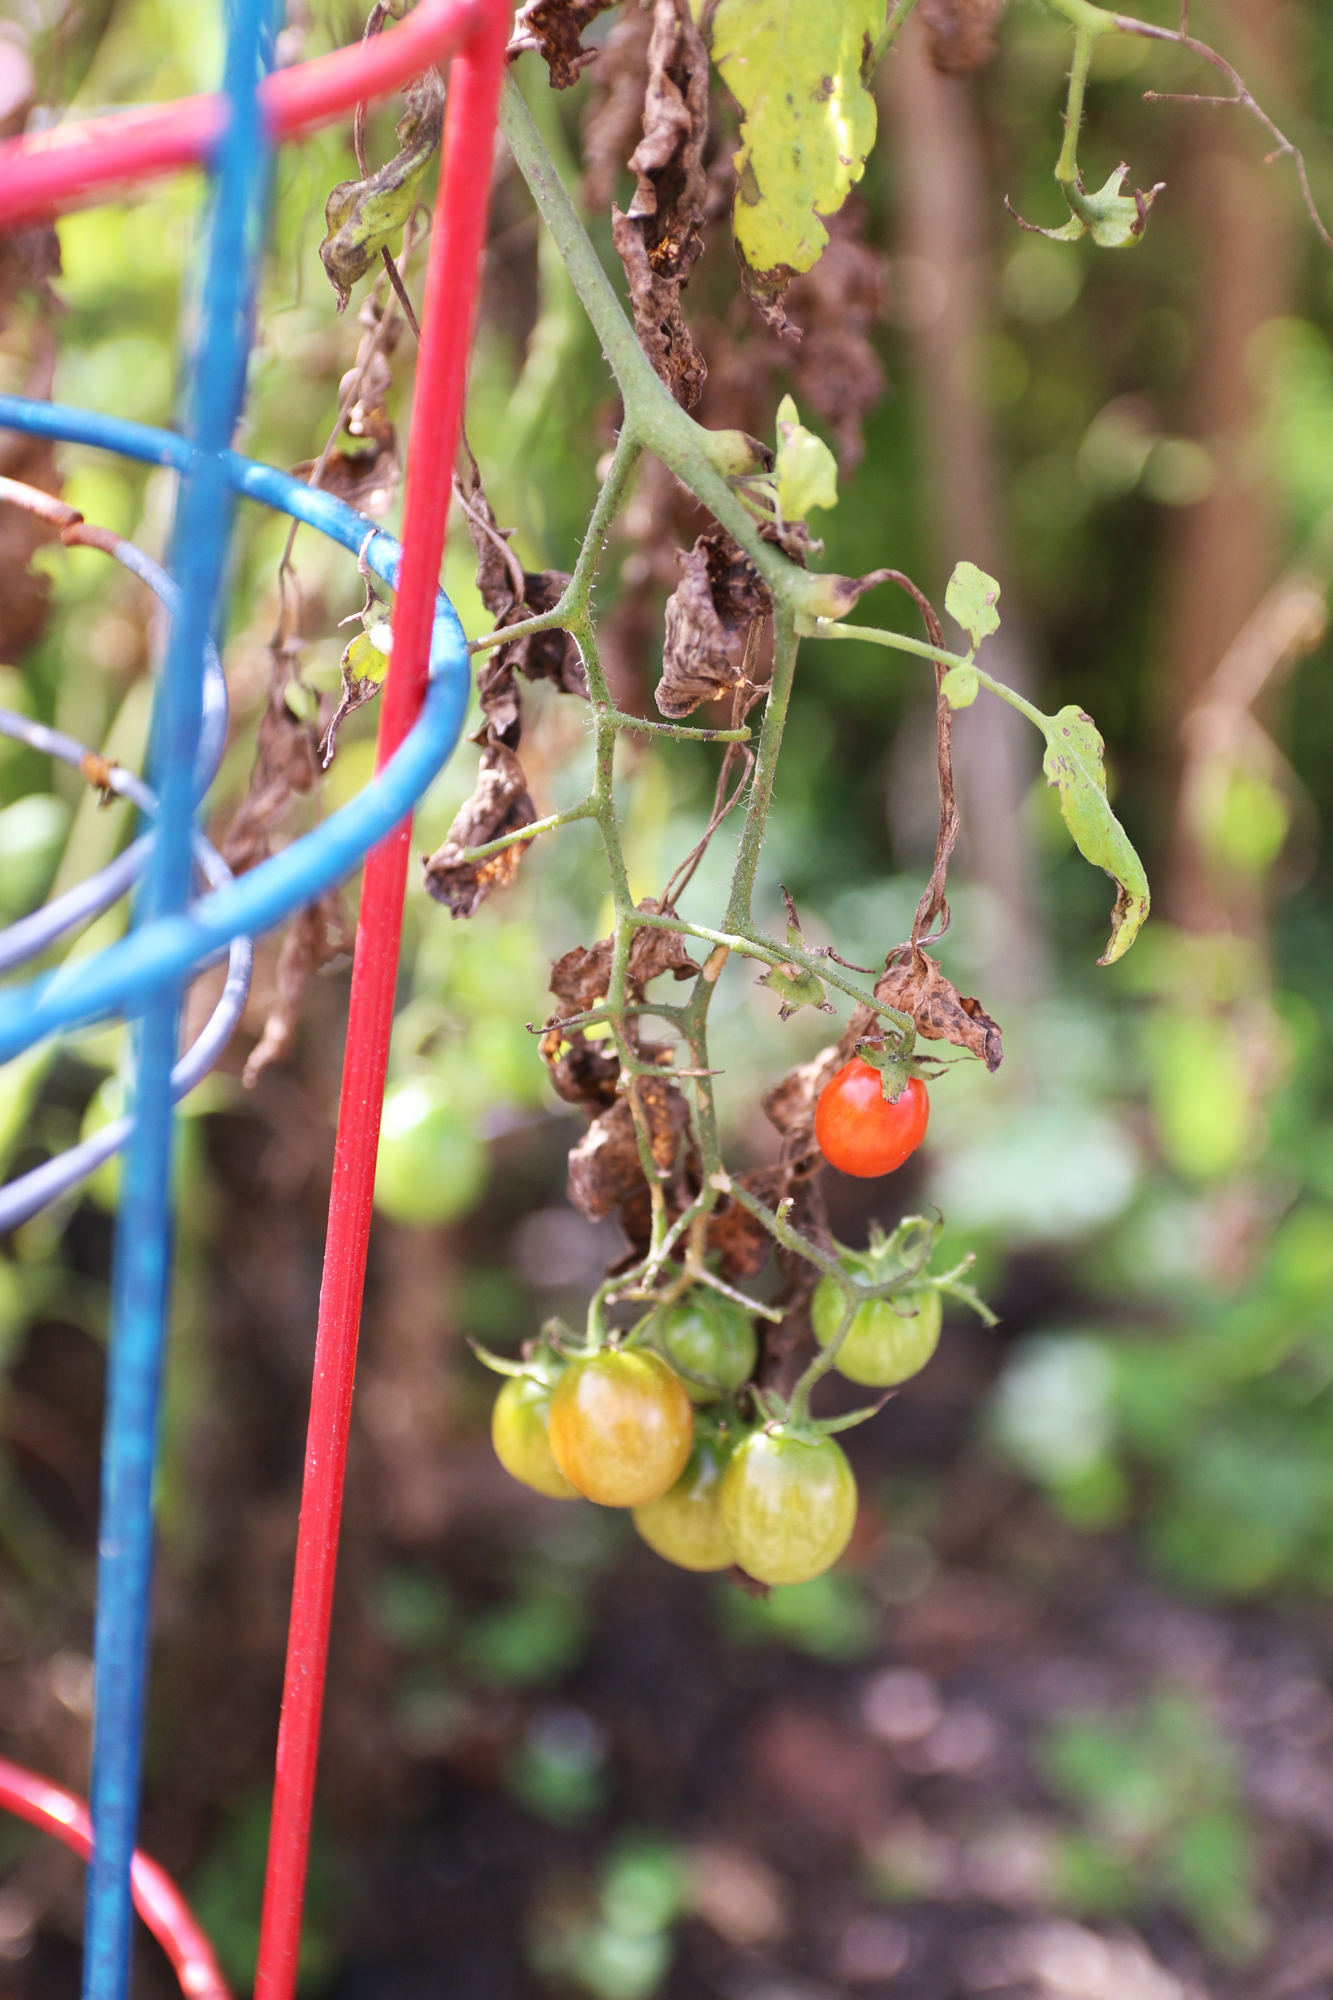 Cherry tomatoes are found all over different beds in the 601 Hammock Lane community gardens. Photo by Jarleene Almenas